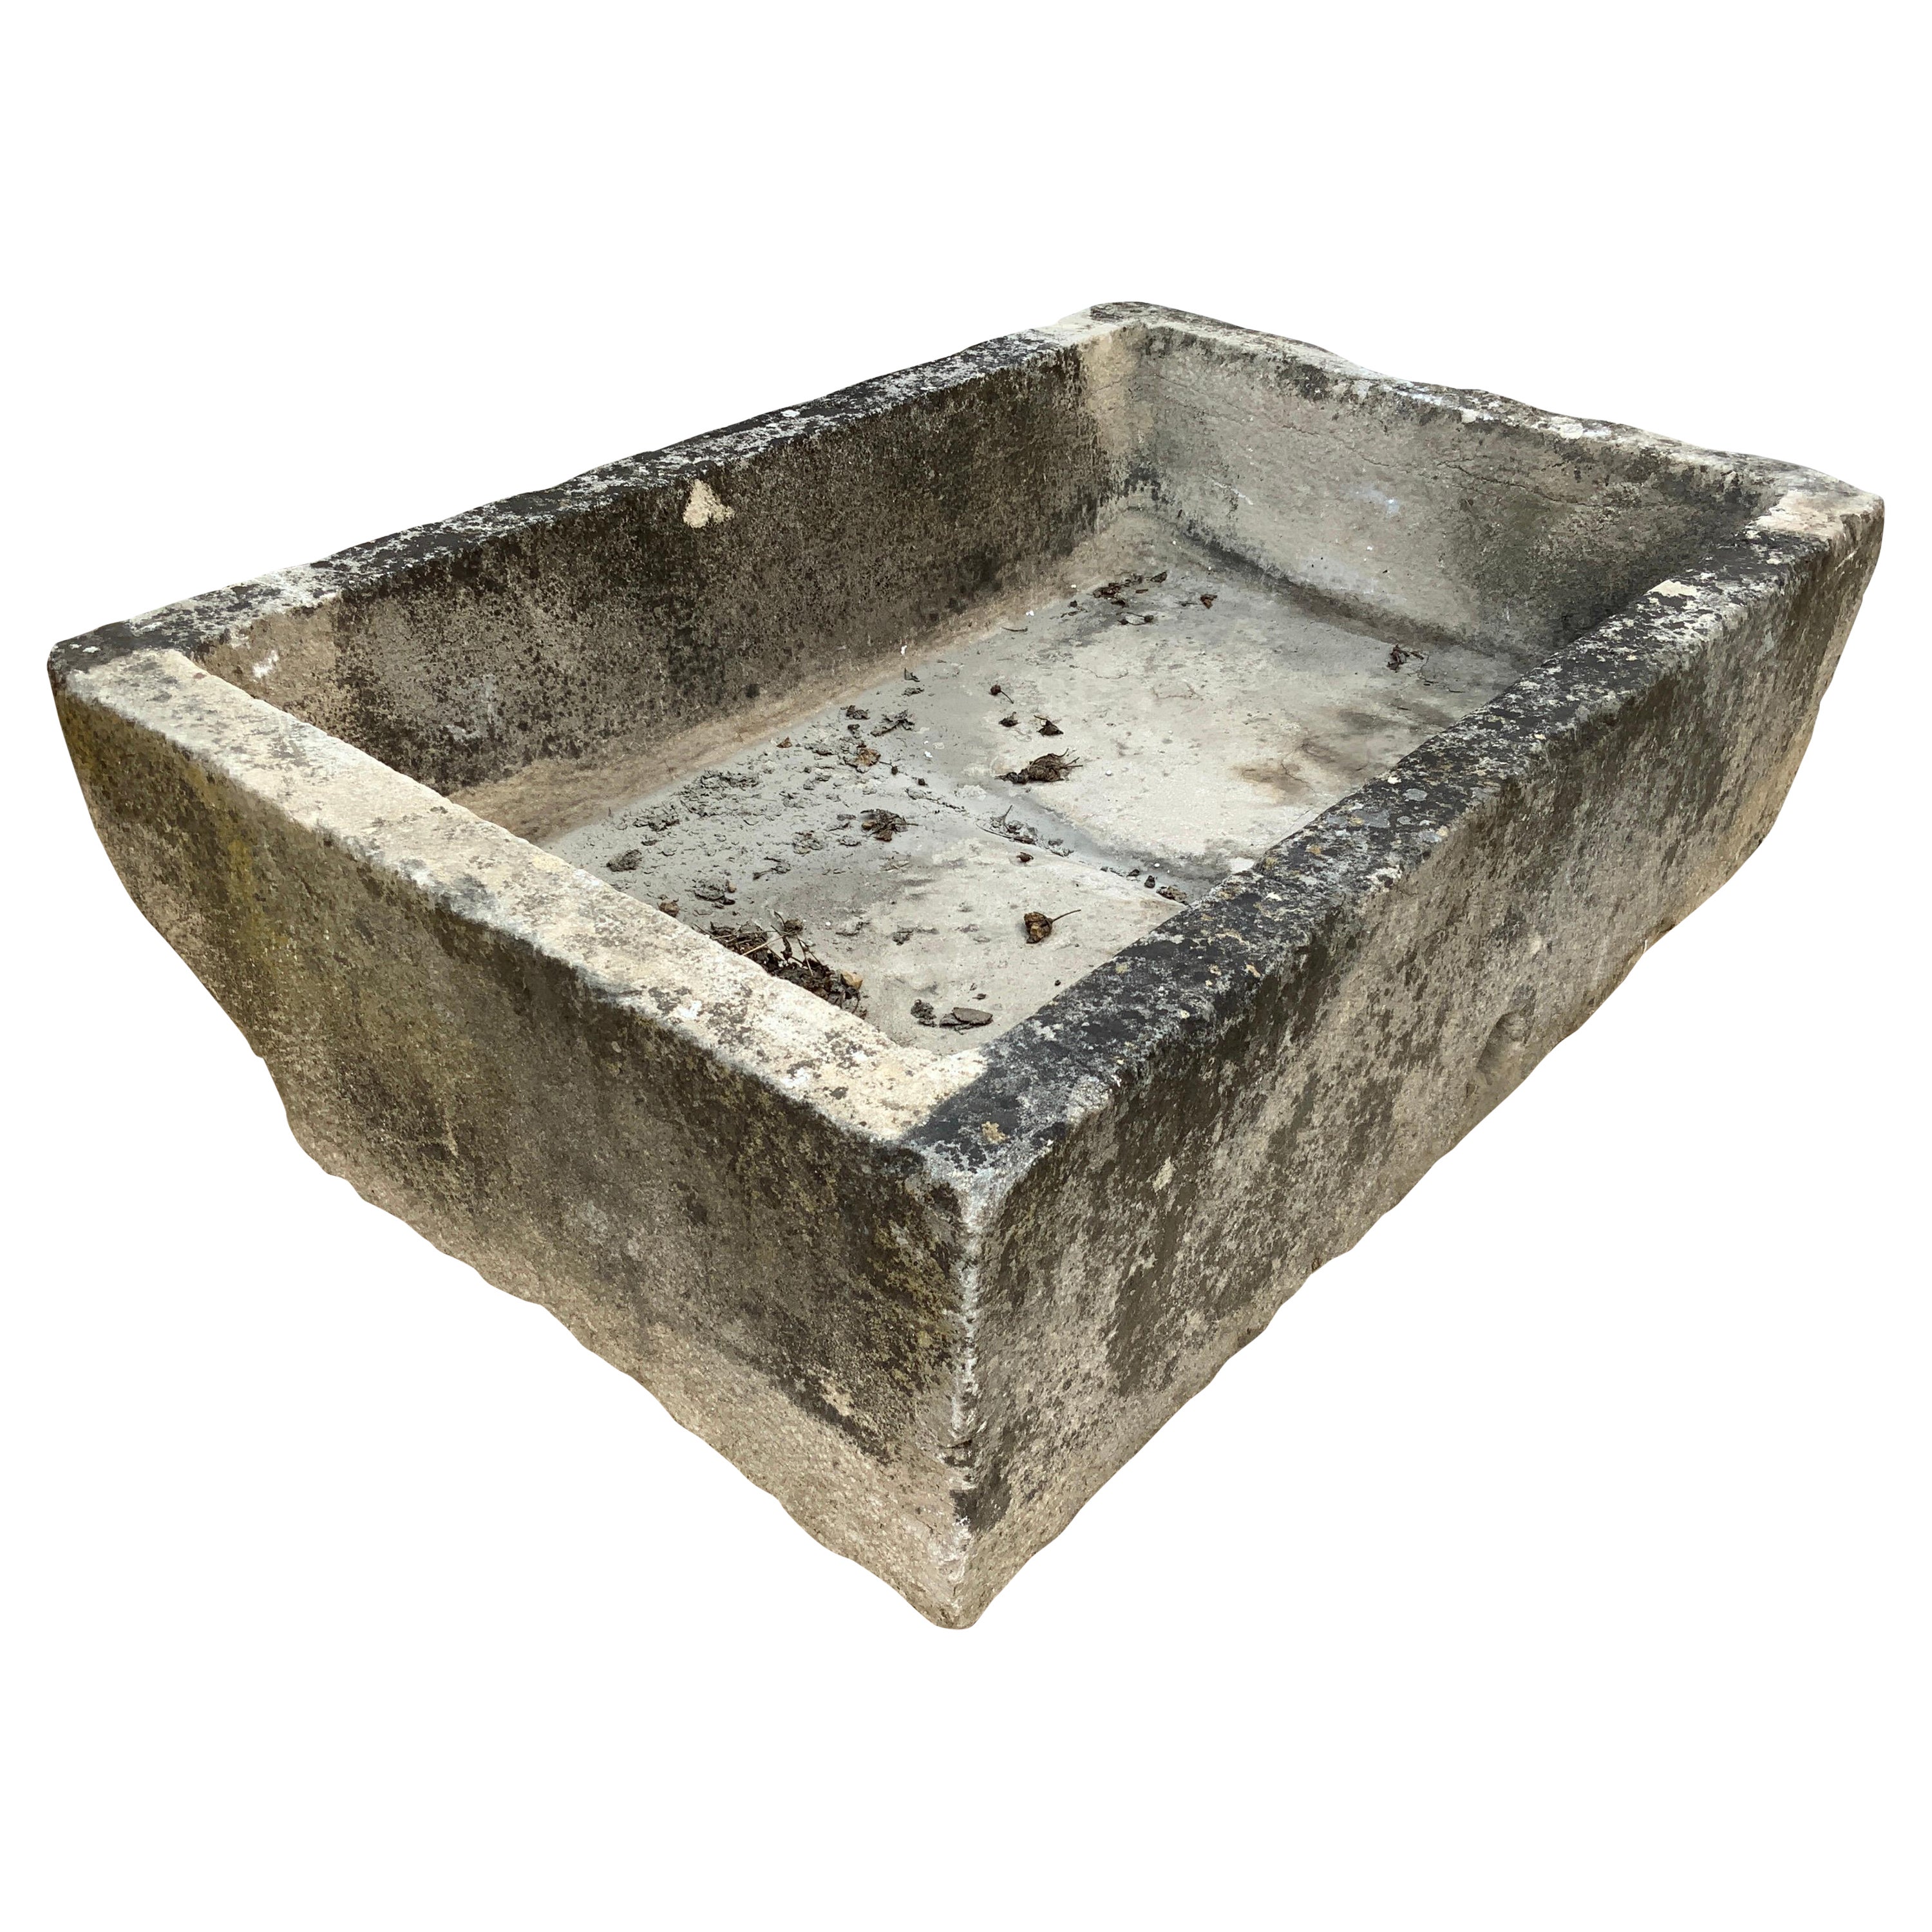 What is a stone trough?